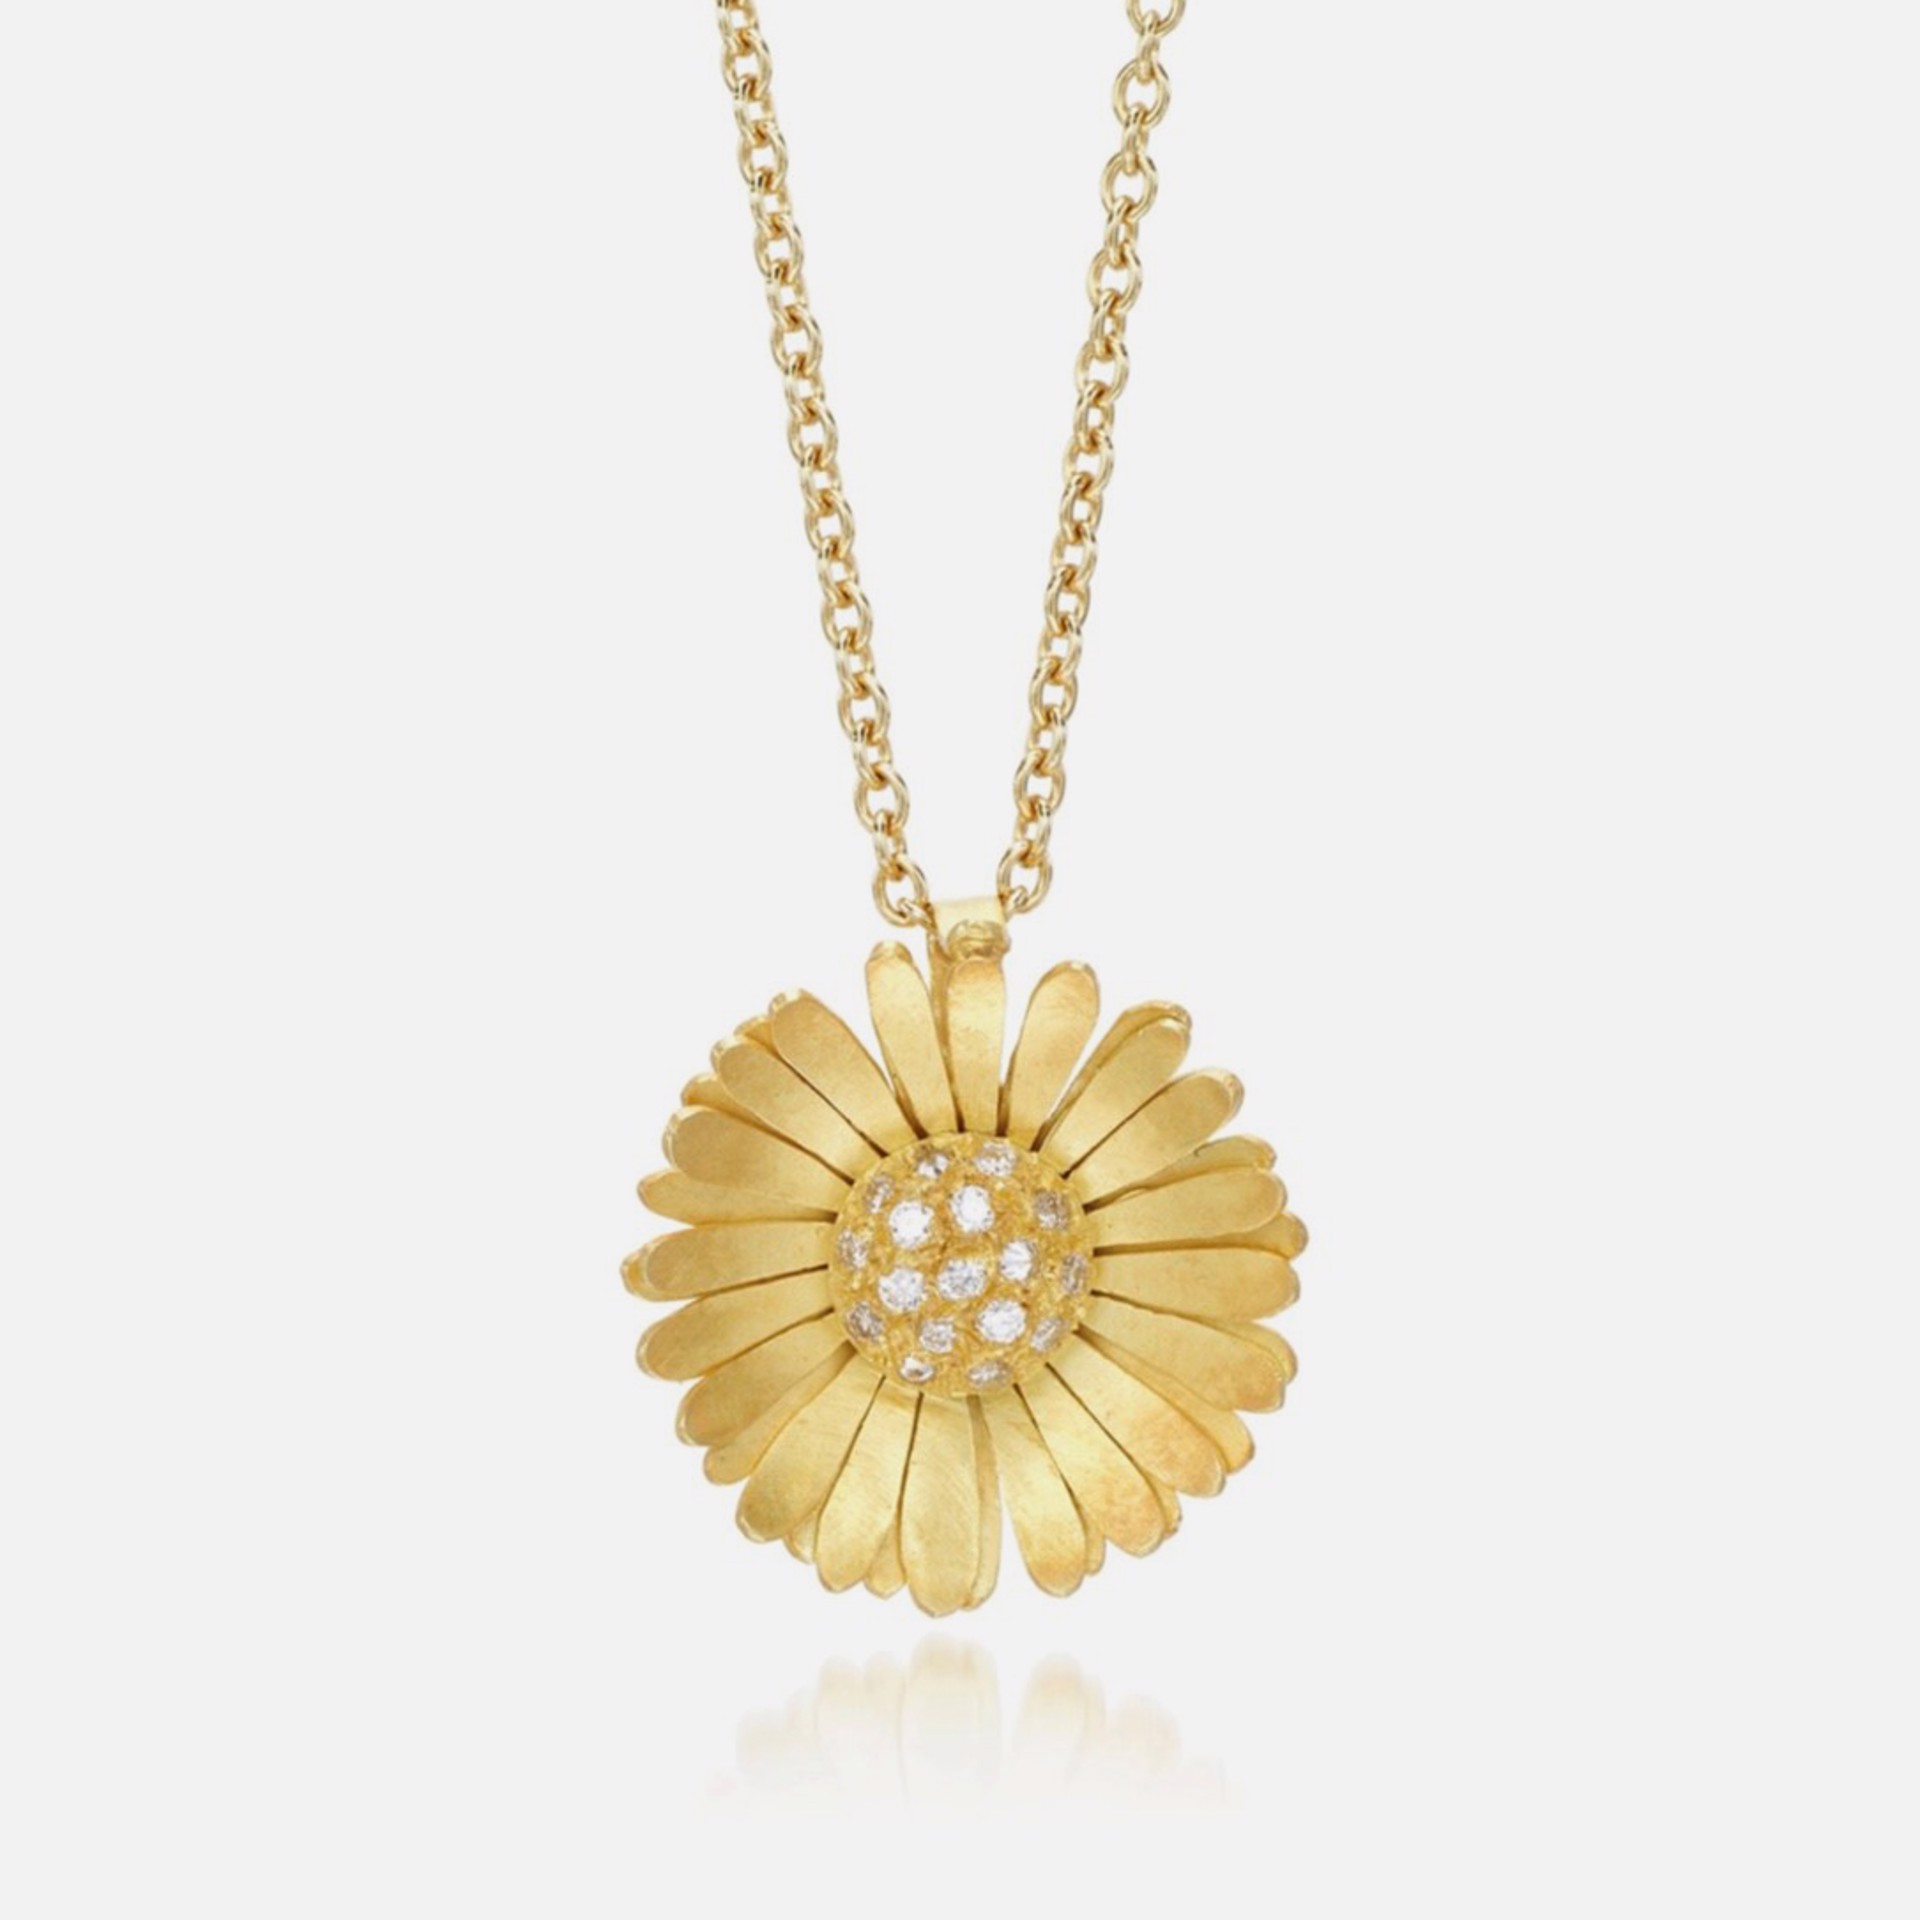 Daisy: Pendant by Christopher Thompson Royds